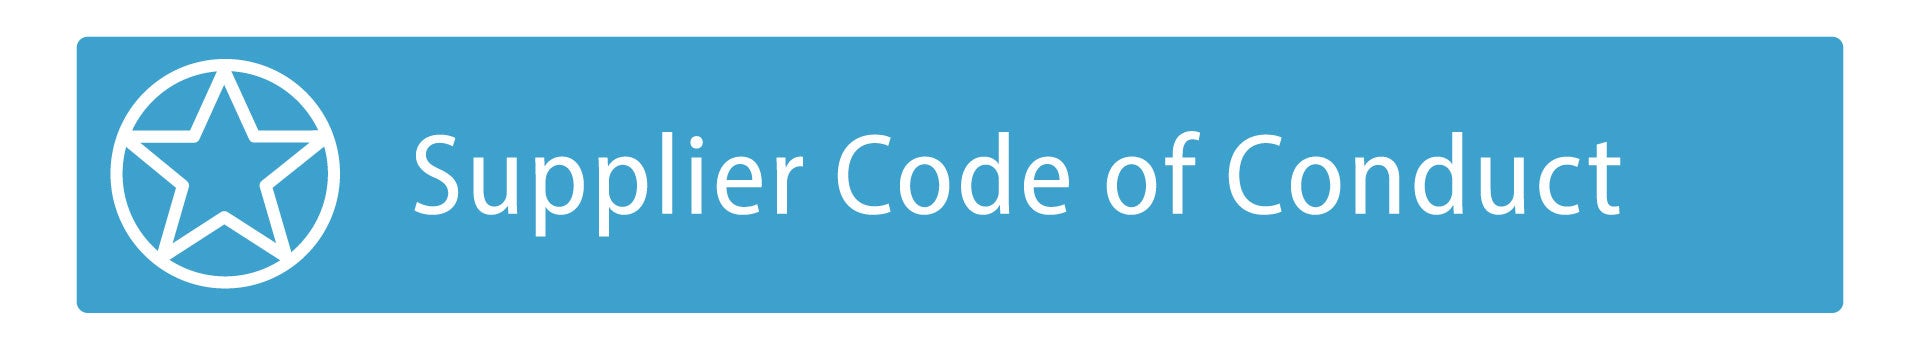 Code-of-Conduct-Icon.jpg